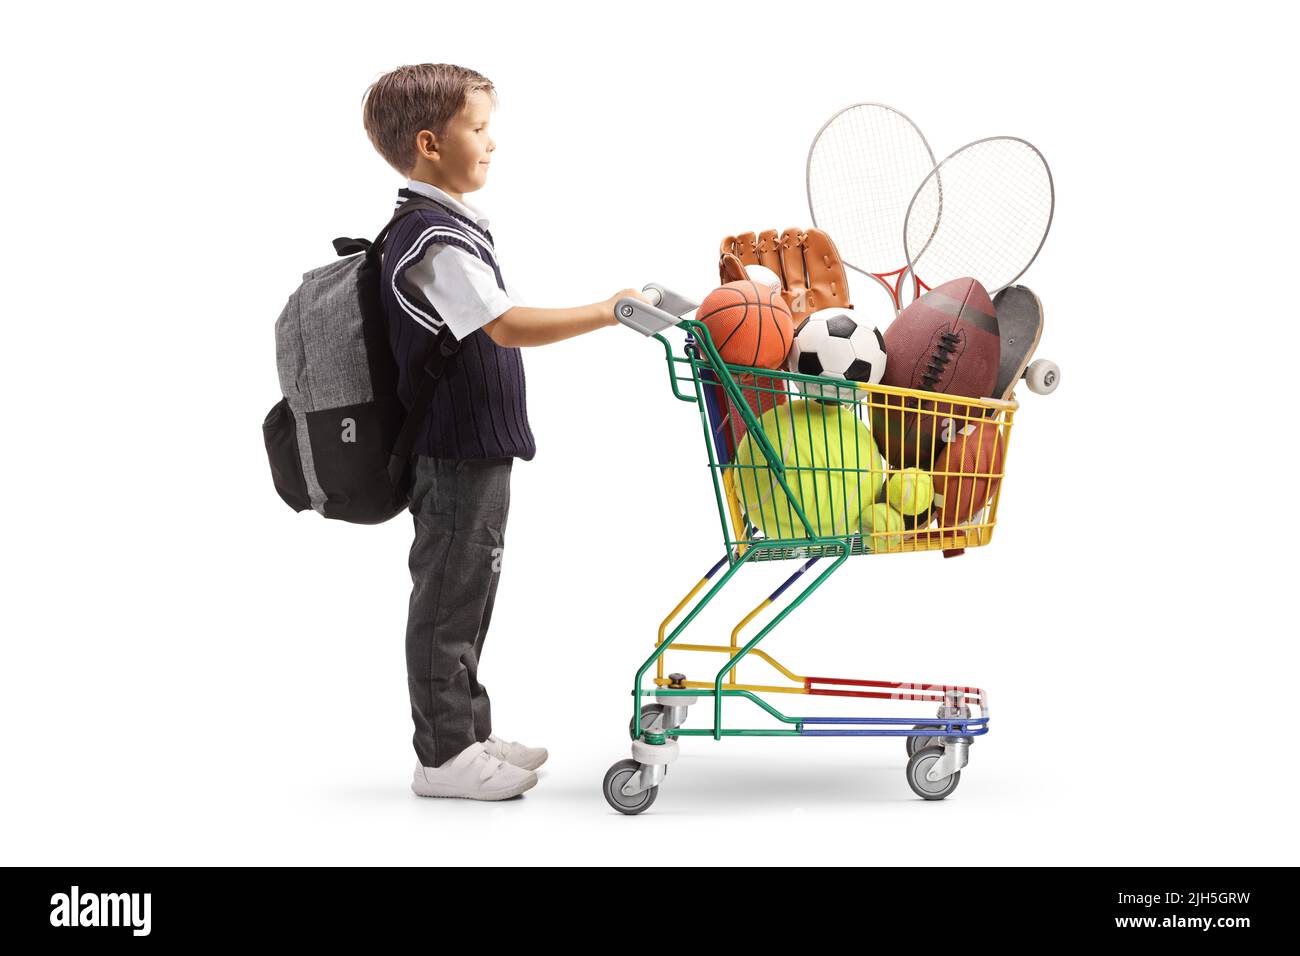 Full length profile shot of a schoolboy in a uniform with a shopping cart full of sports equipment isolated on white background Stock Photo